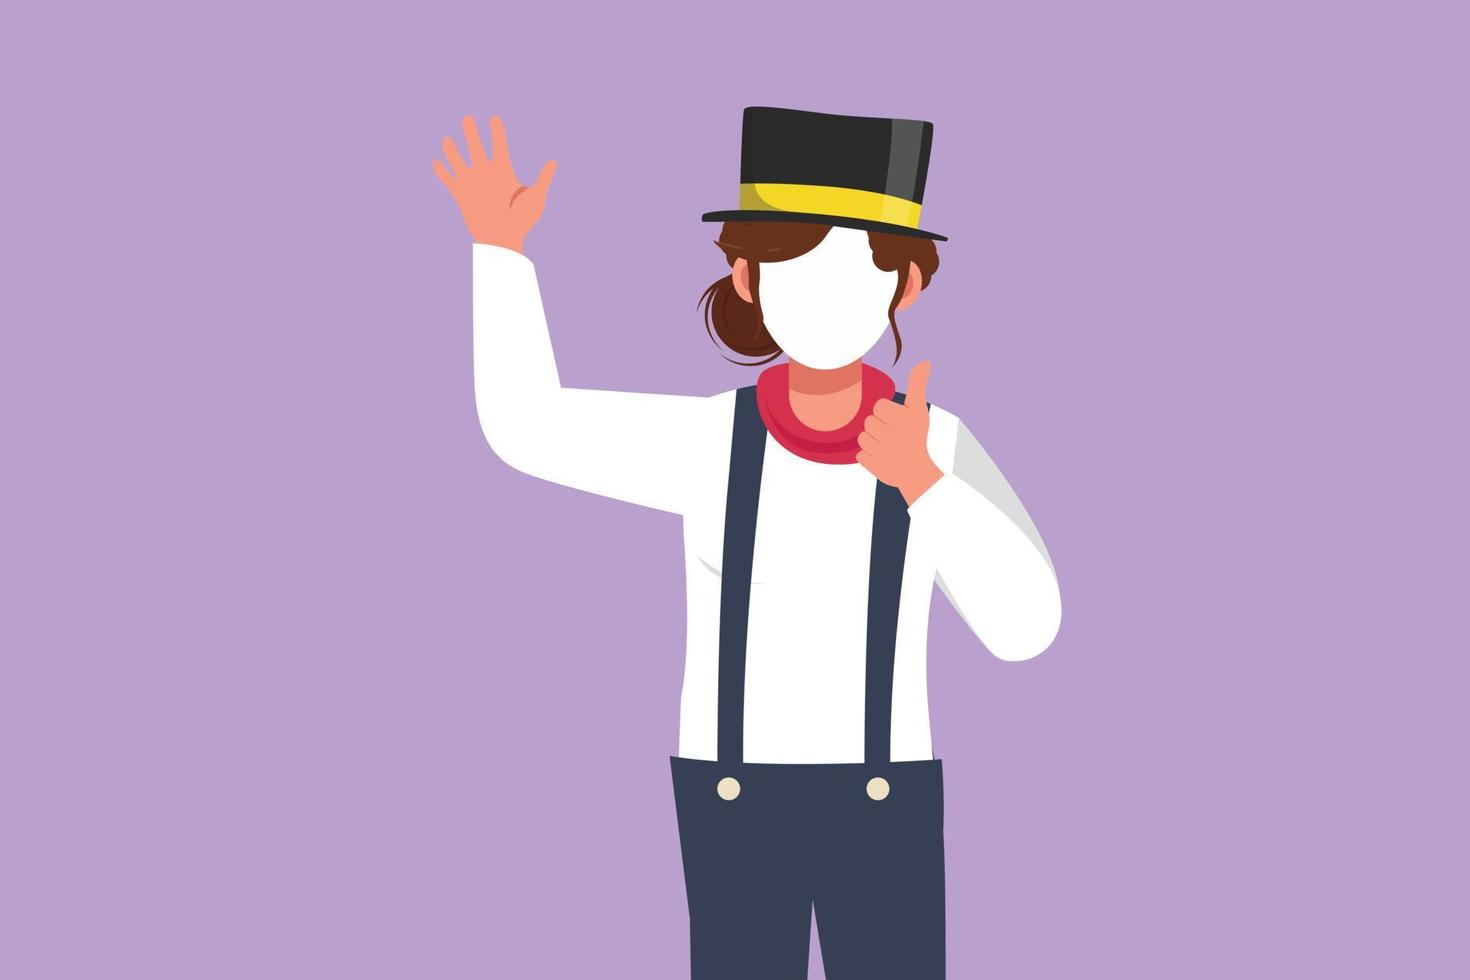 Graphic flat design drawing female mime artist say hi with thumbs up gesture, white face make up puts on silent motion comedy show at circus show. Creative industry. Cartoon style vector illustration